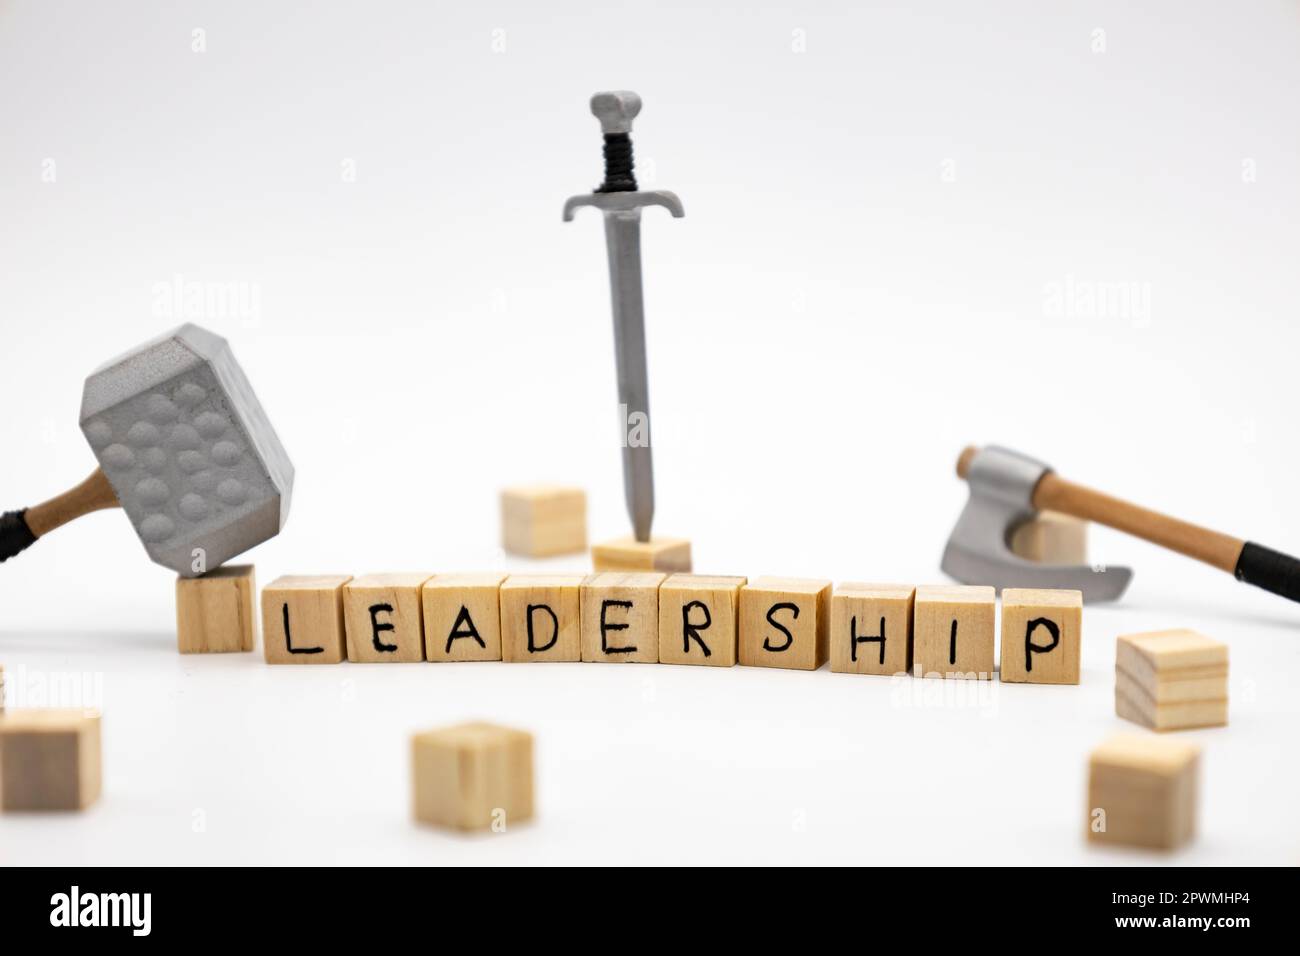 The wooden cubes with the word LEADERSHIP and the weapon around against white background. The medieval weapons is hammer, sword and axe. Stock Photo